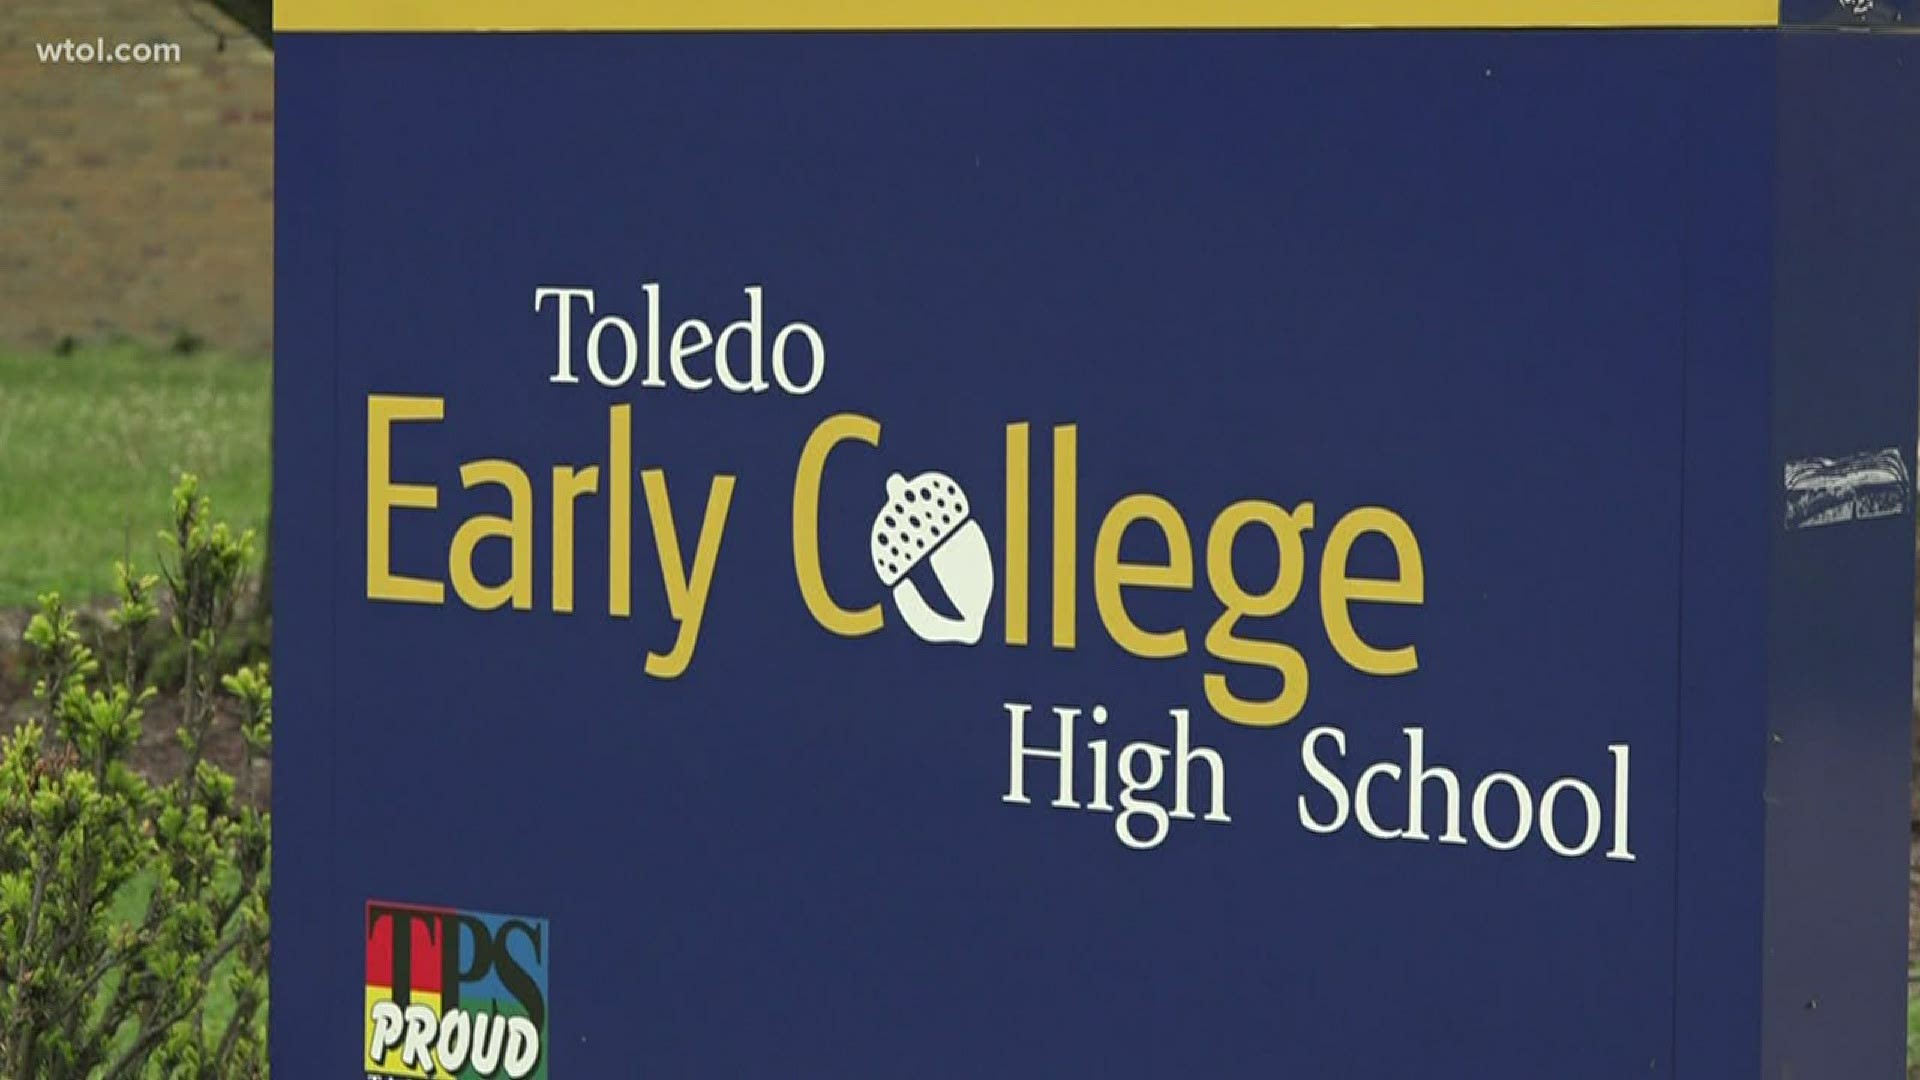 High school is official over for a handful of Toledo Public students as the district starts the first of many commencement ceremonies online.